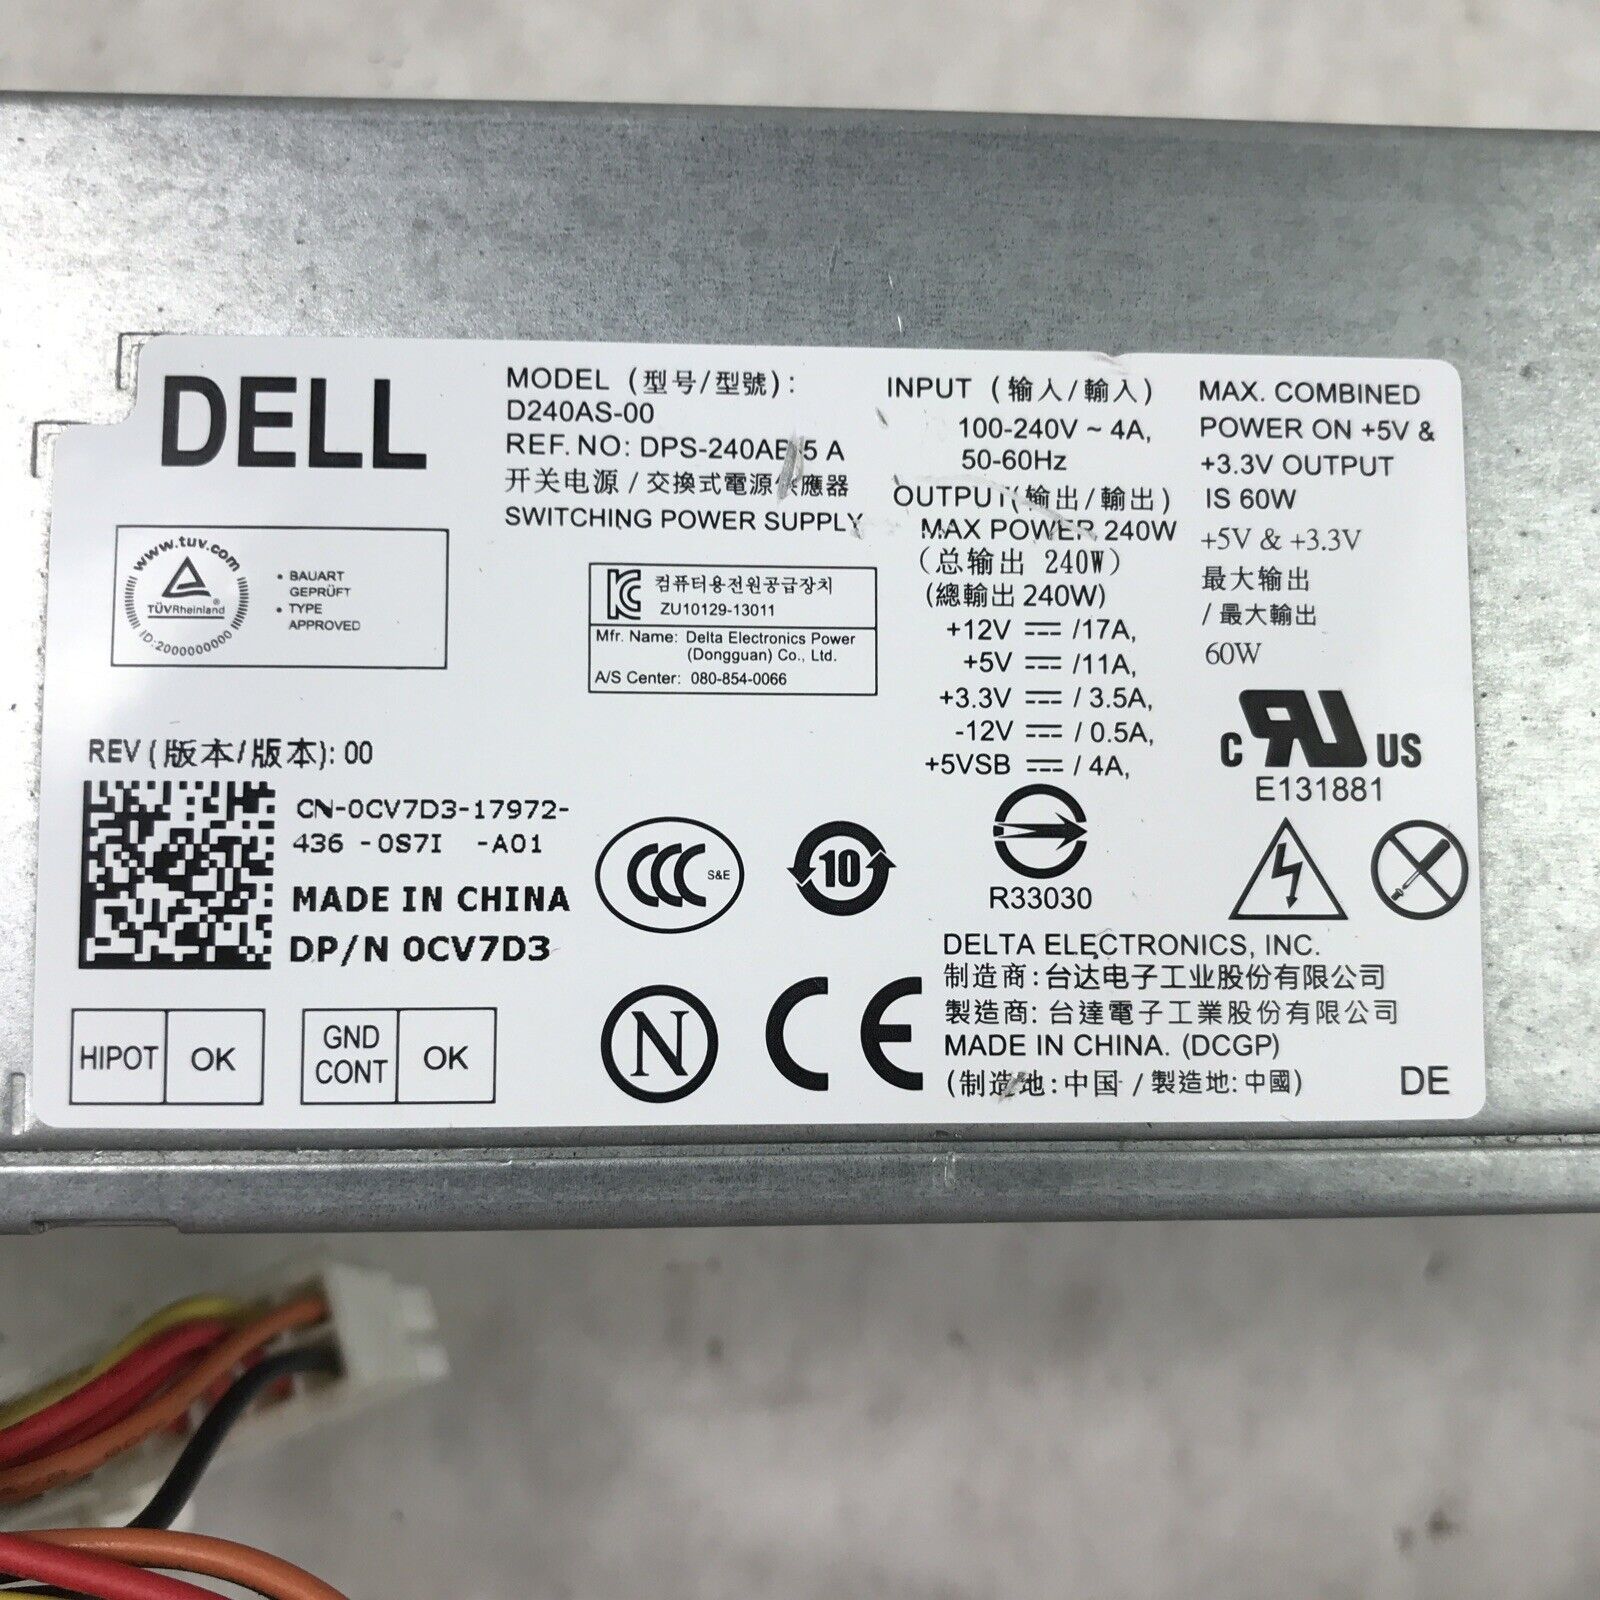 Dell CV7D3 240W 60Hz 240V 17A Switching Power Supply DPS-240AB-5